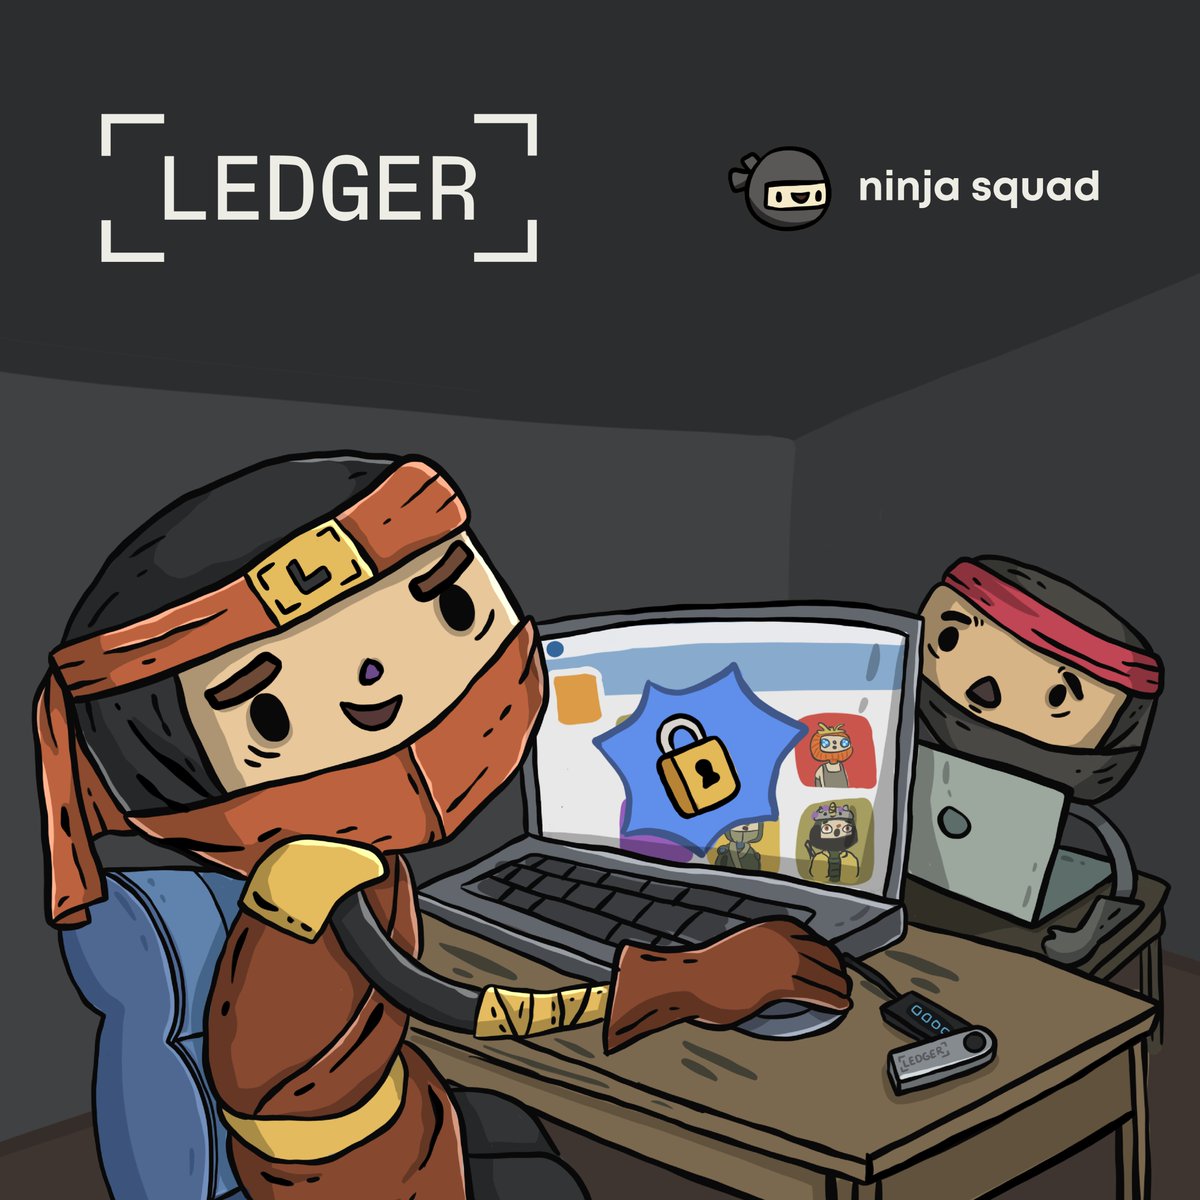 Ninja Squad 🤝 @Ledger Together, Ninja Squad and Ledger are uniting to empower the web3 community with education and innovation!!📢 To celebrate our union we're giving away 2 Ninja Squad NFTs and 1 Ledger Nano S Plus to lucky winners 🎉 Like and RT to enter 🥷❤️ !poof